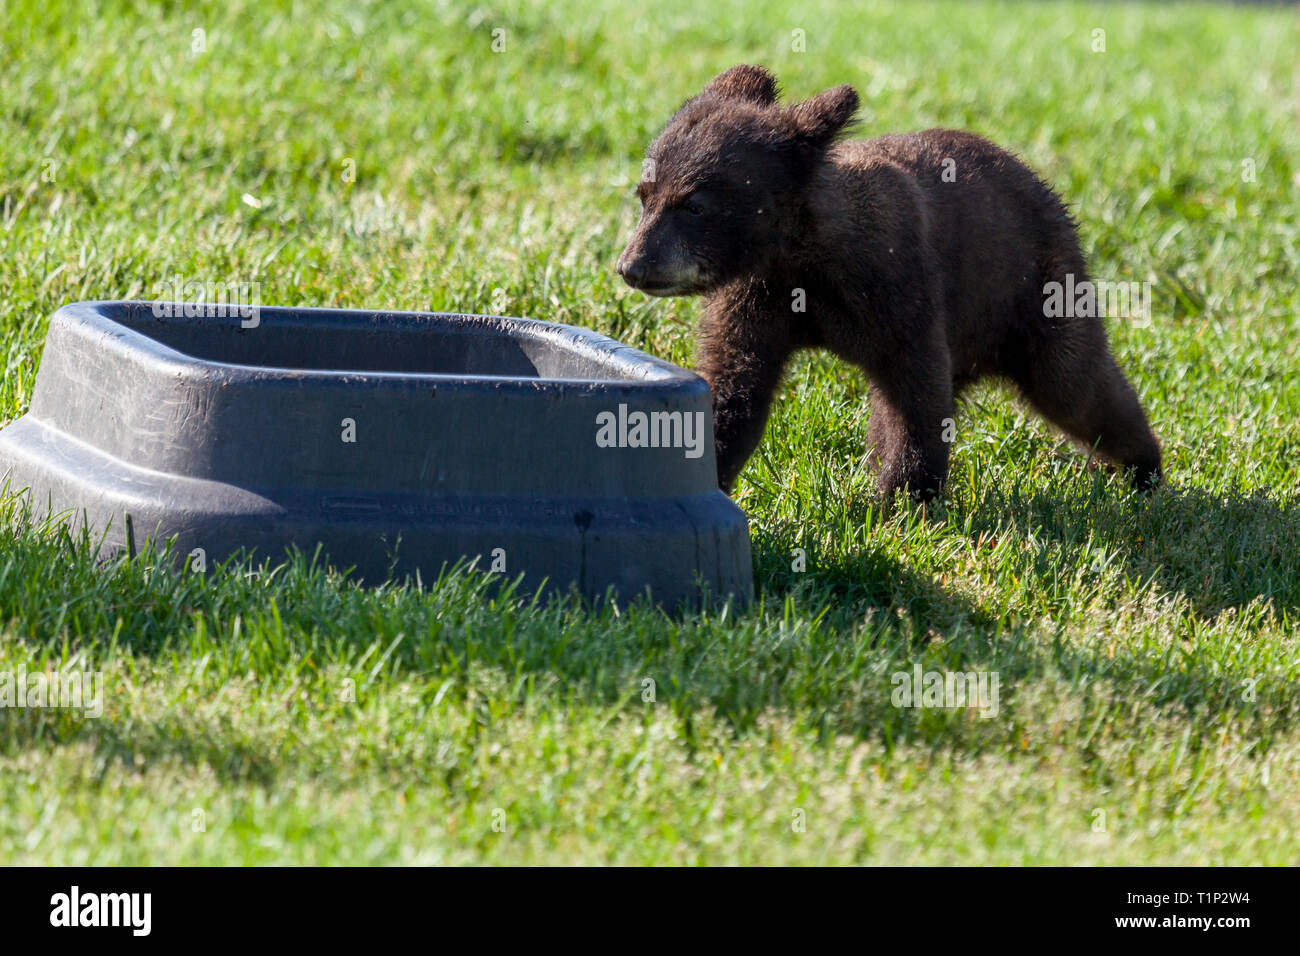 A cute little black bear walking to a food bowl in its enclosure in the  spring grass and sunshine Stock Photo - Alamy